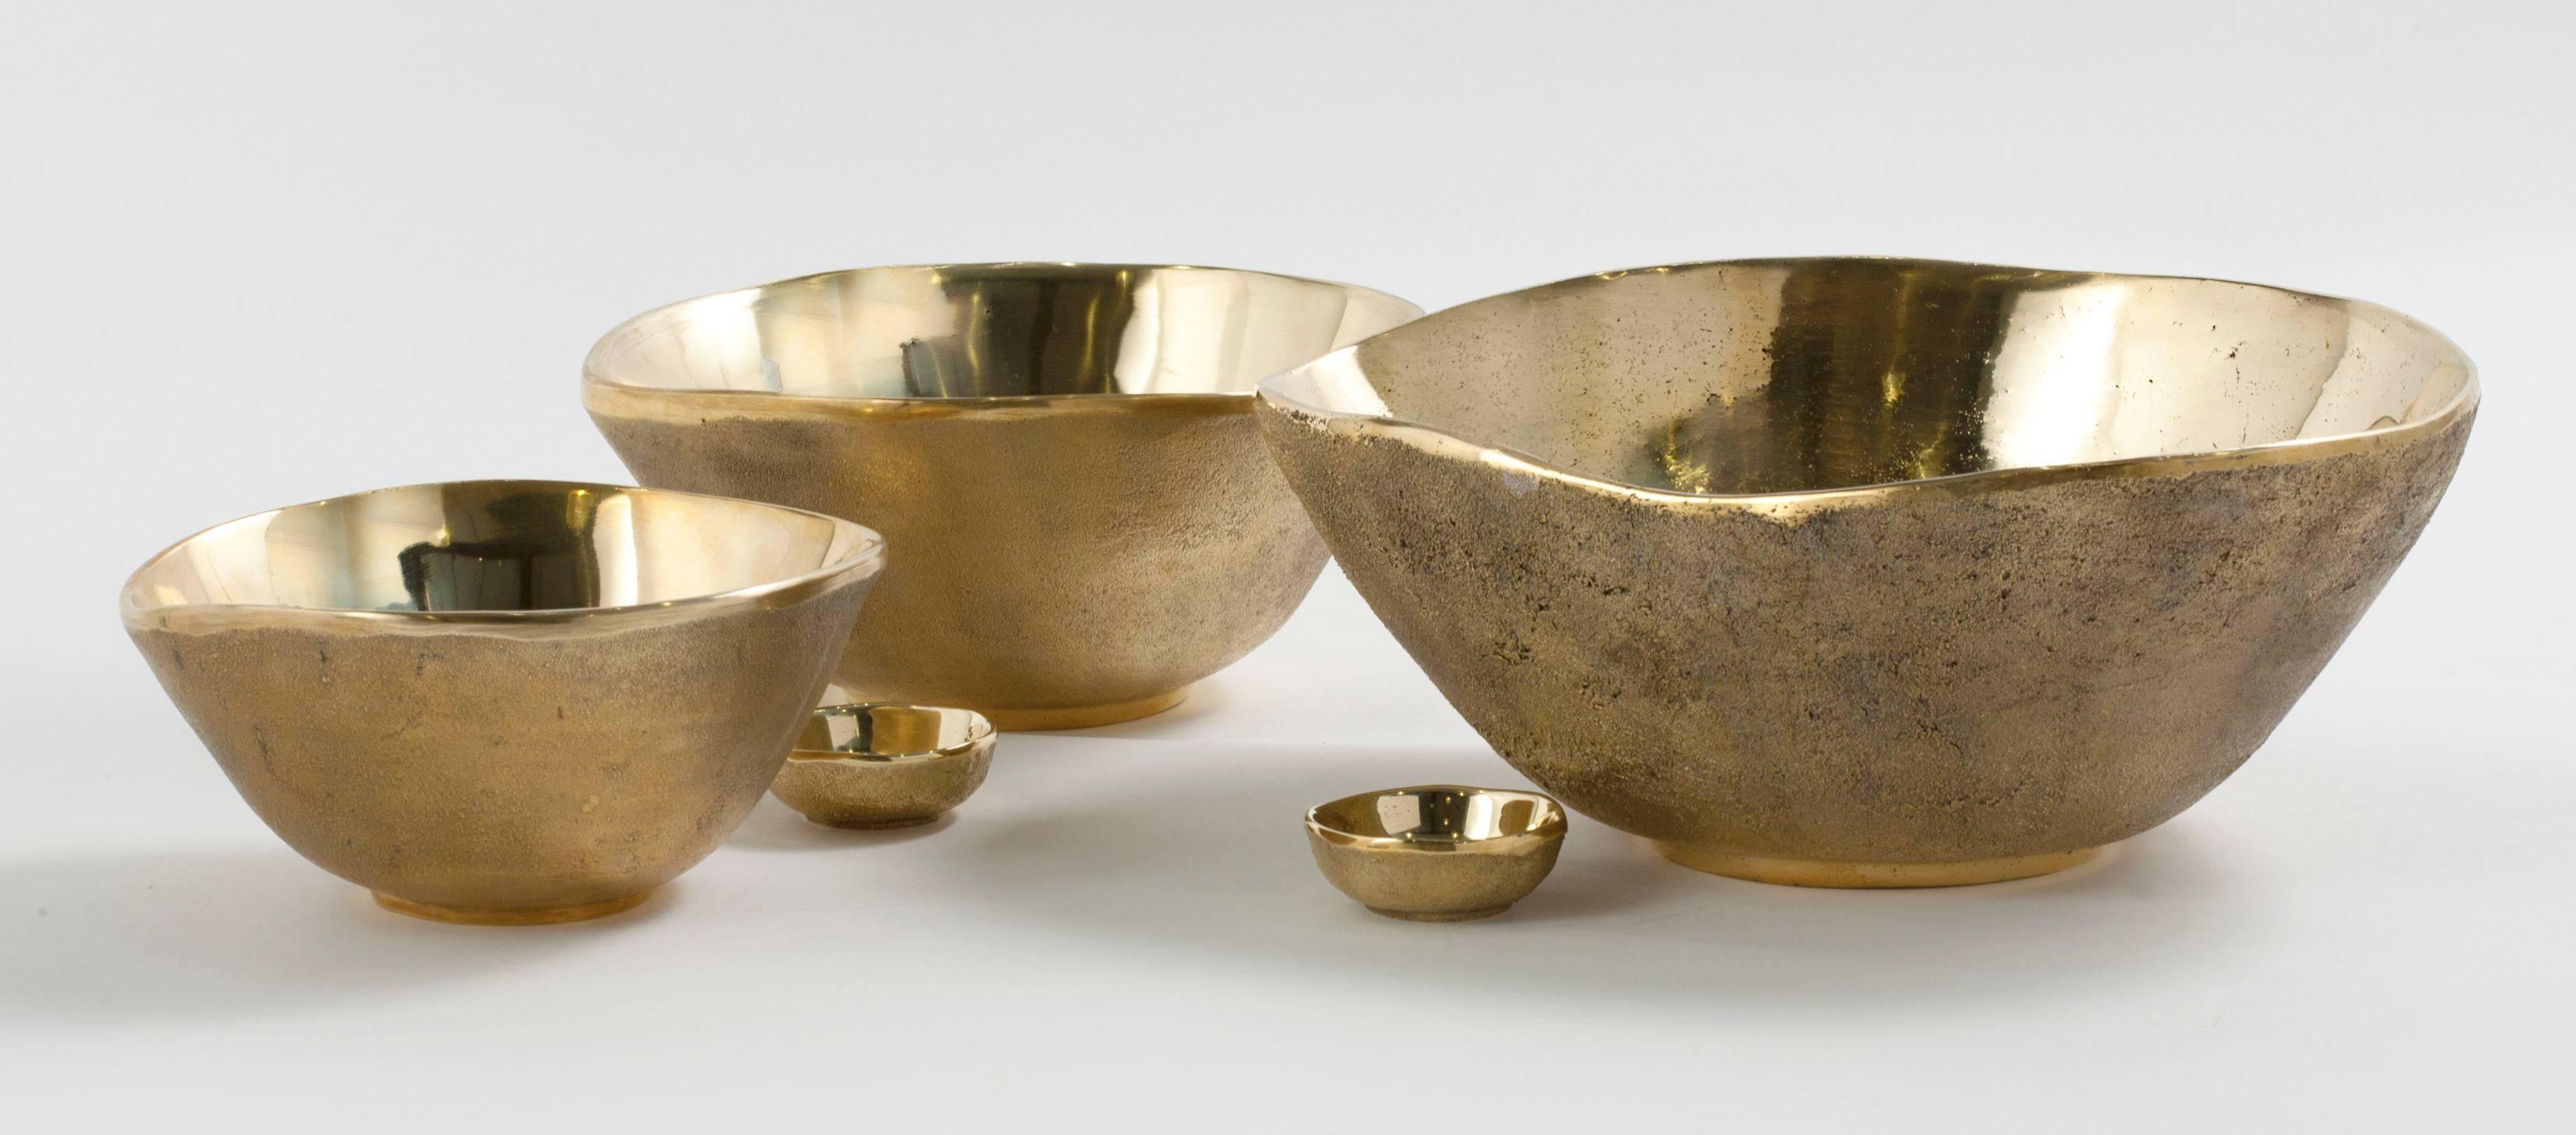 3 Bronze bowls by Jaimal Odedra. 

Each piece is sand cast by artisans in Morocco. Stamped: Jaimal Odedra.

Dimensions of three bowls as follows. 

3.25